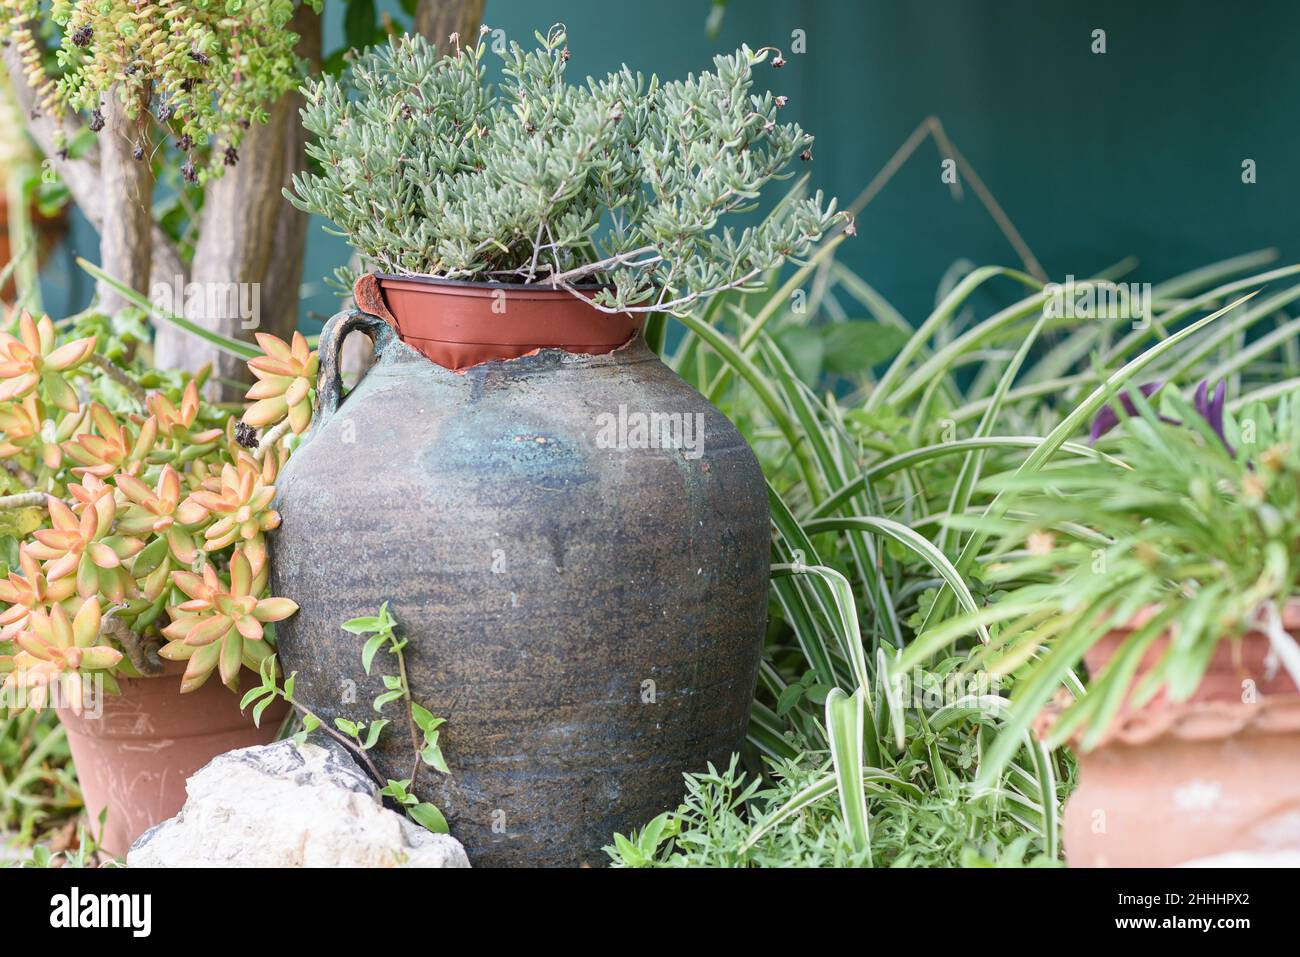 Reused planter ideas. Old vase turn into garden flower pots. Recycled garden design, diy and low-waste lifestyle. Stock Photo